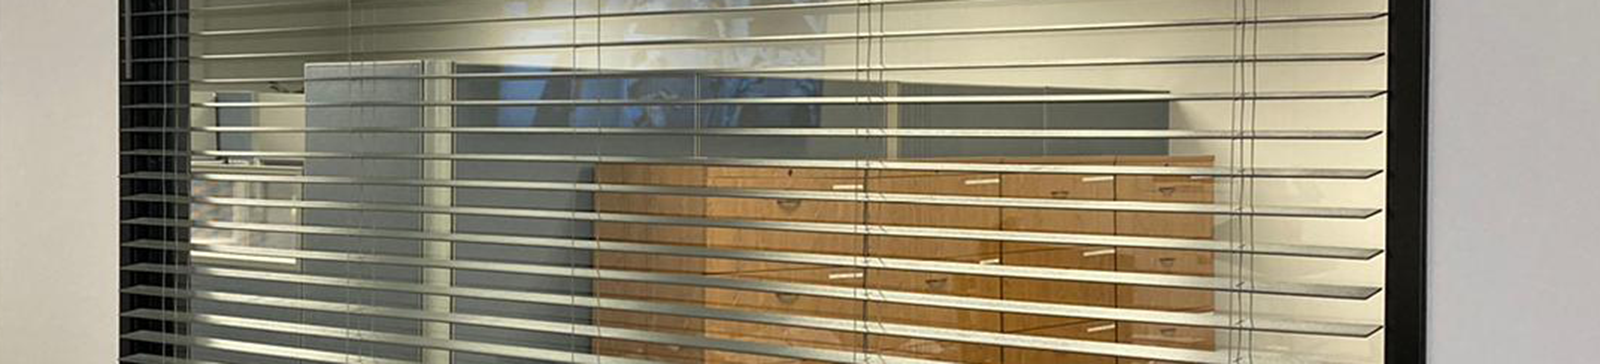 Aluminum Blinds for Large Office Windows in Moraga